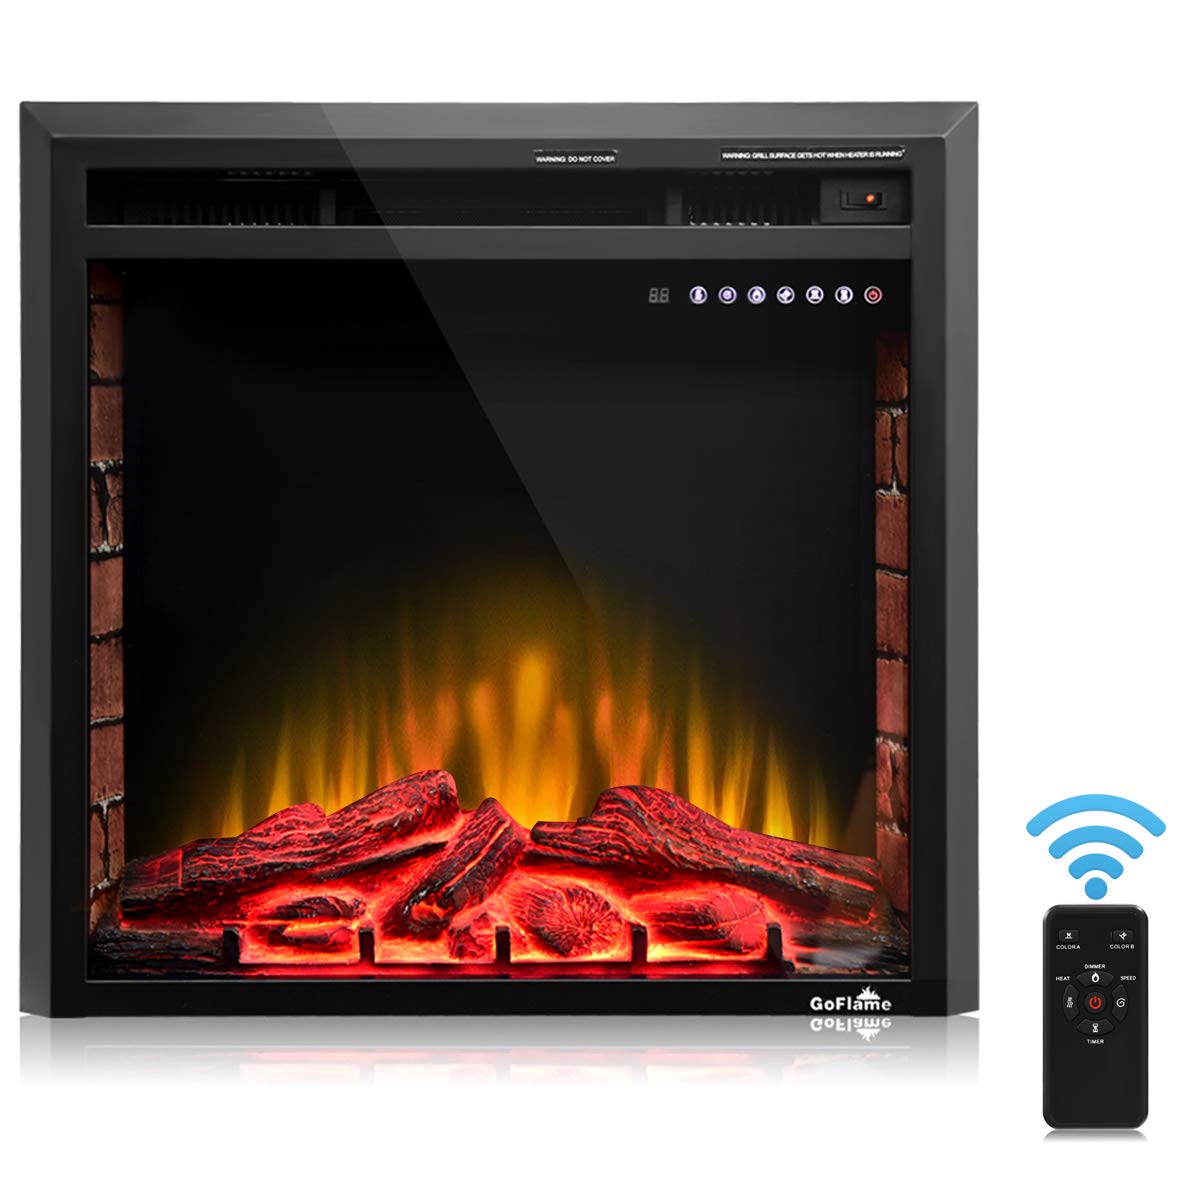 50 Inch Recessed Electric Fireplace New Best fort Recessed 36" Electric Fireplace Multi Operating Electric Fireplace Insert with Remote 750w 1500w Built In Electric Fireplace